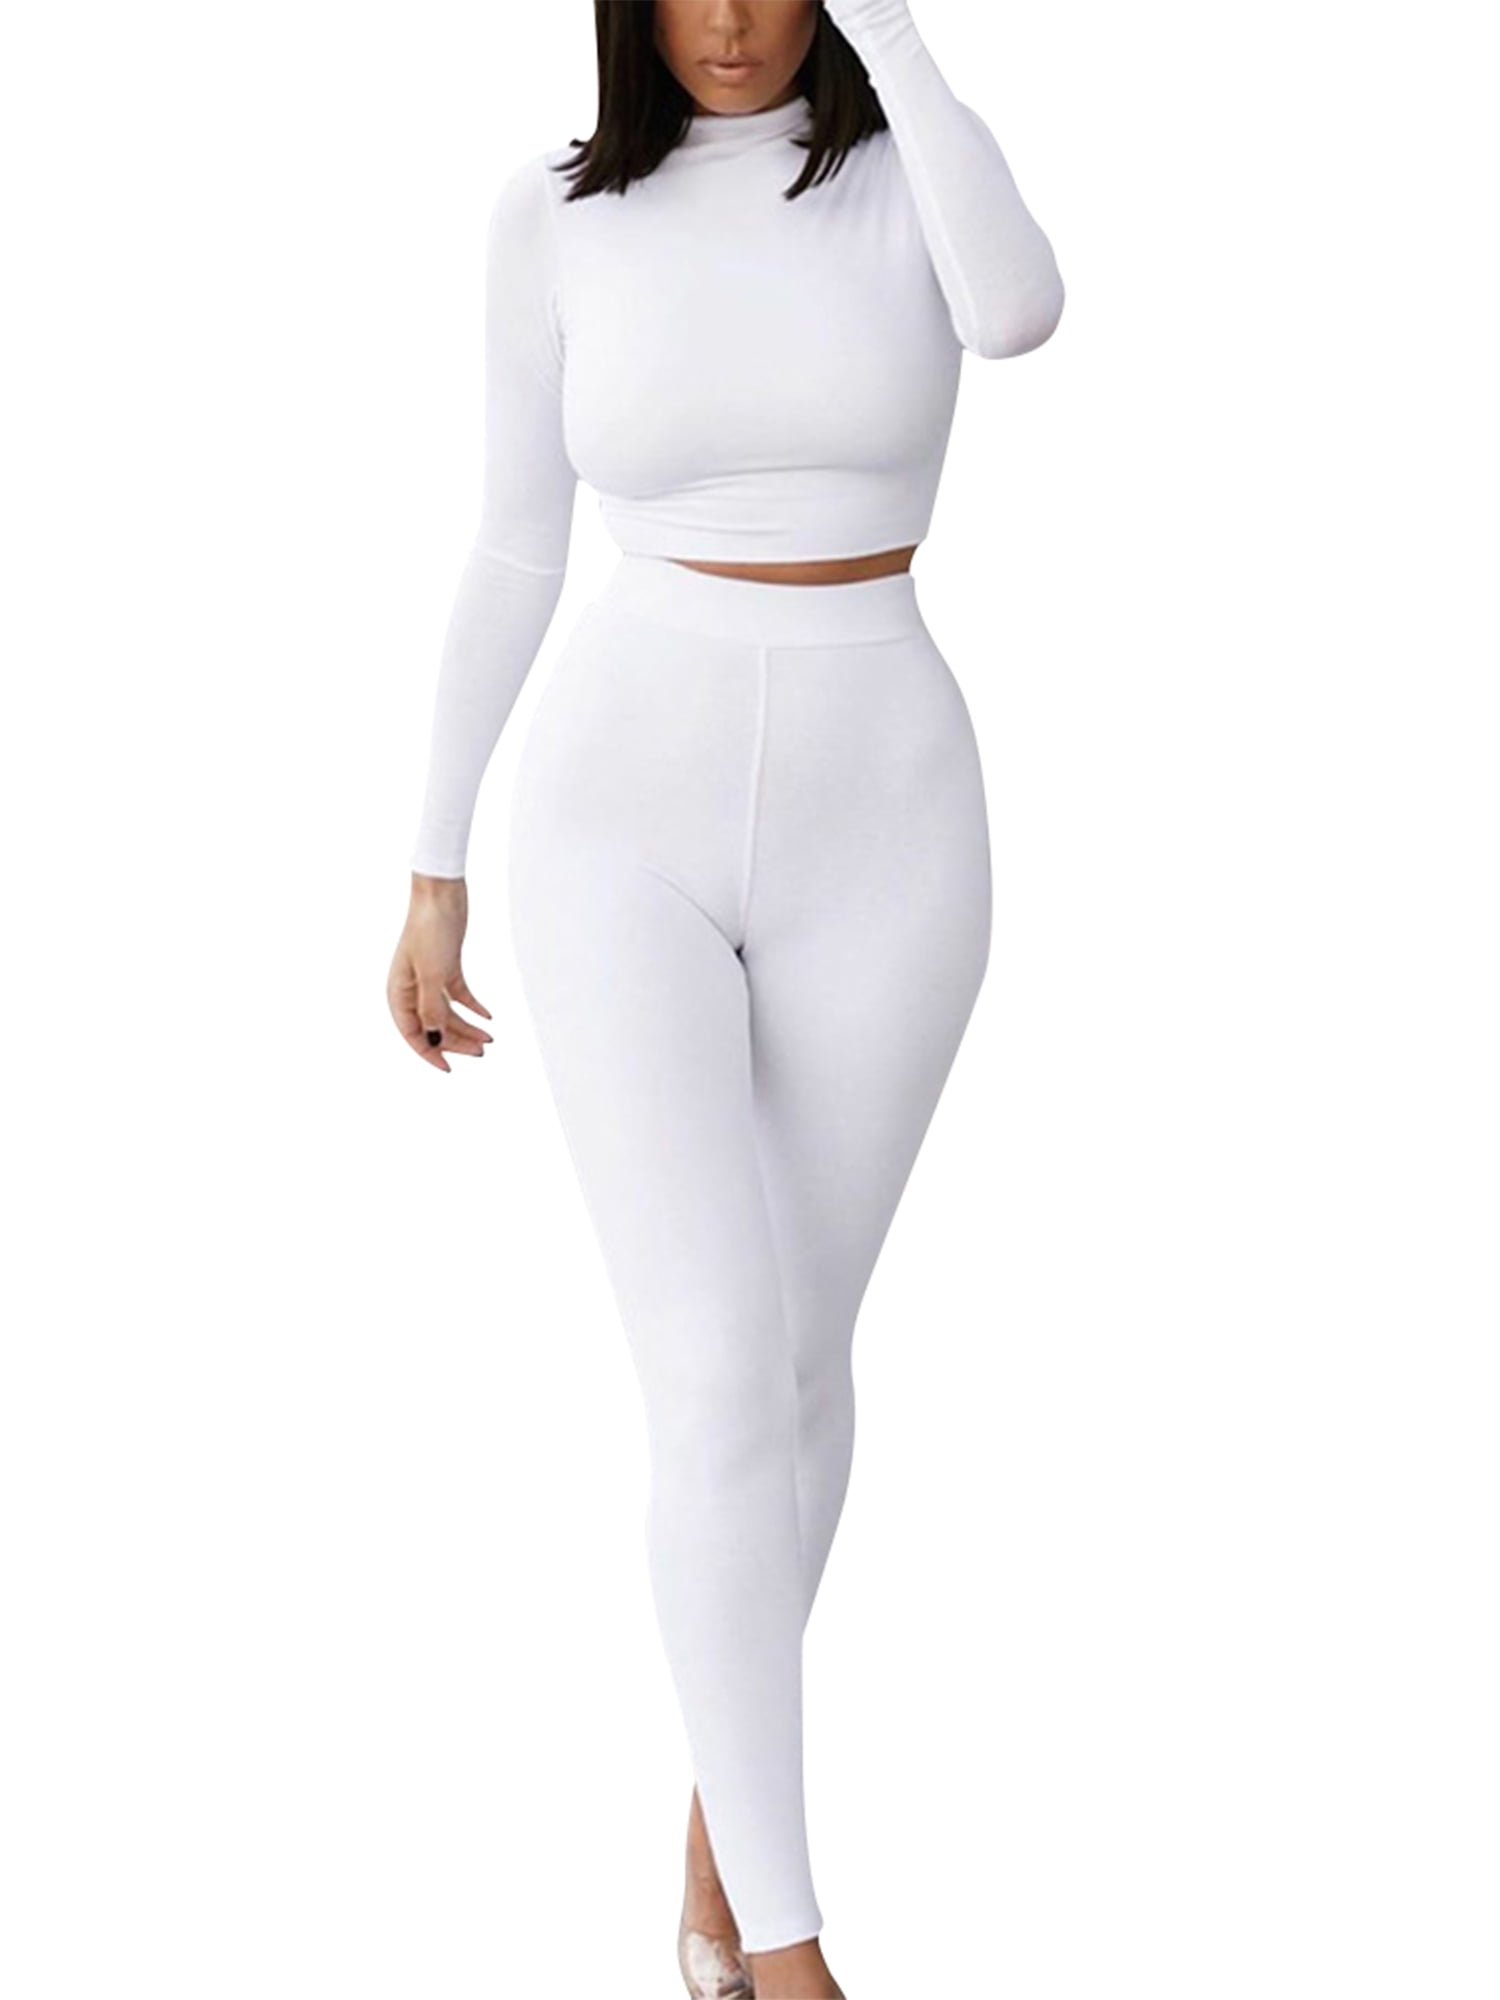 Lu Lu Align Outfits White Clothing Set High Waist Leggings Suit Seamless  Running Tracksuit Fitness Workout Outfits Gym Wear Girl Top From 6,69 €